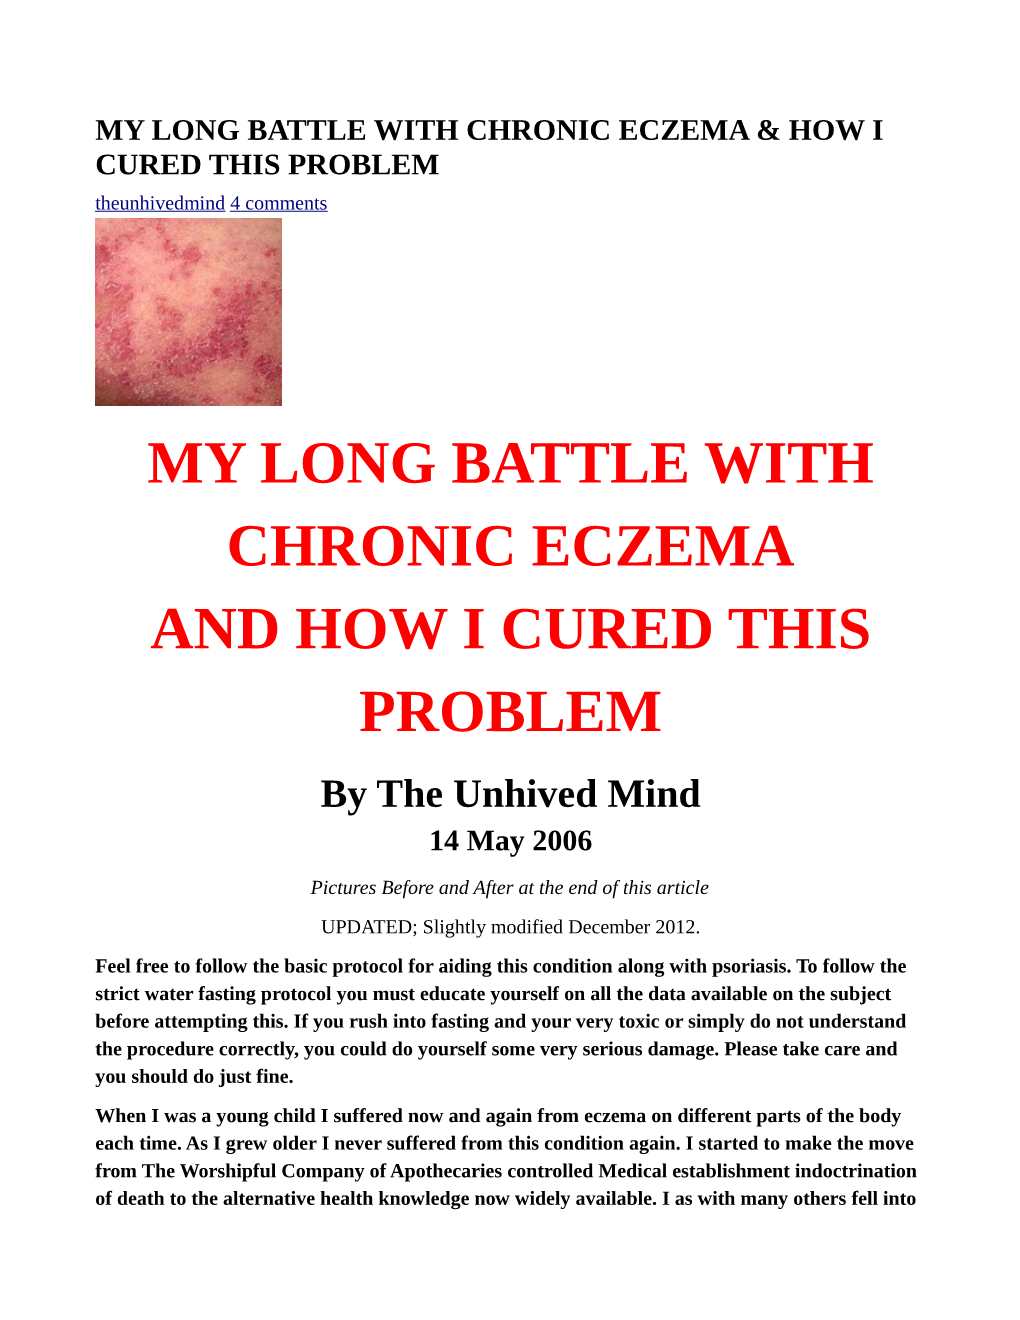 MY LONG BATTLE with CHRONIC ECZEMA and HOW I CURED THIS PROBLEM by the Unhived Mind 14 May 2006